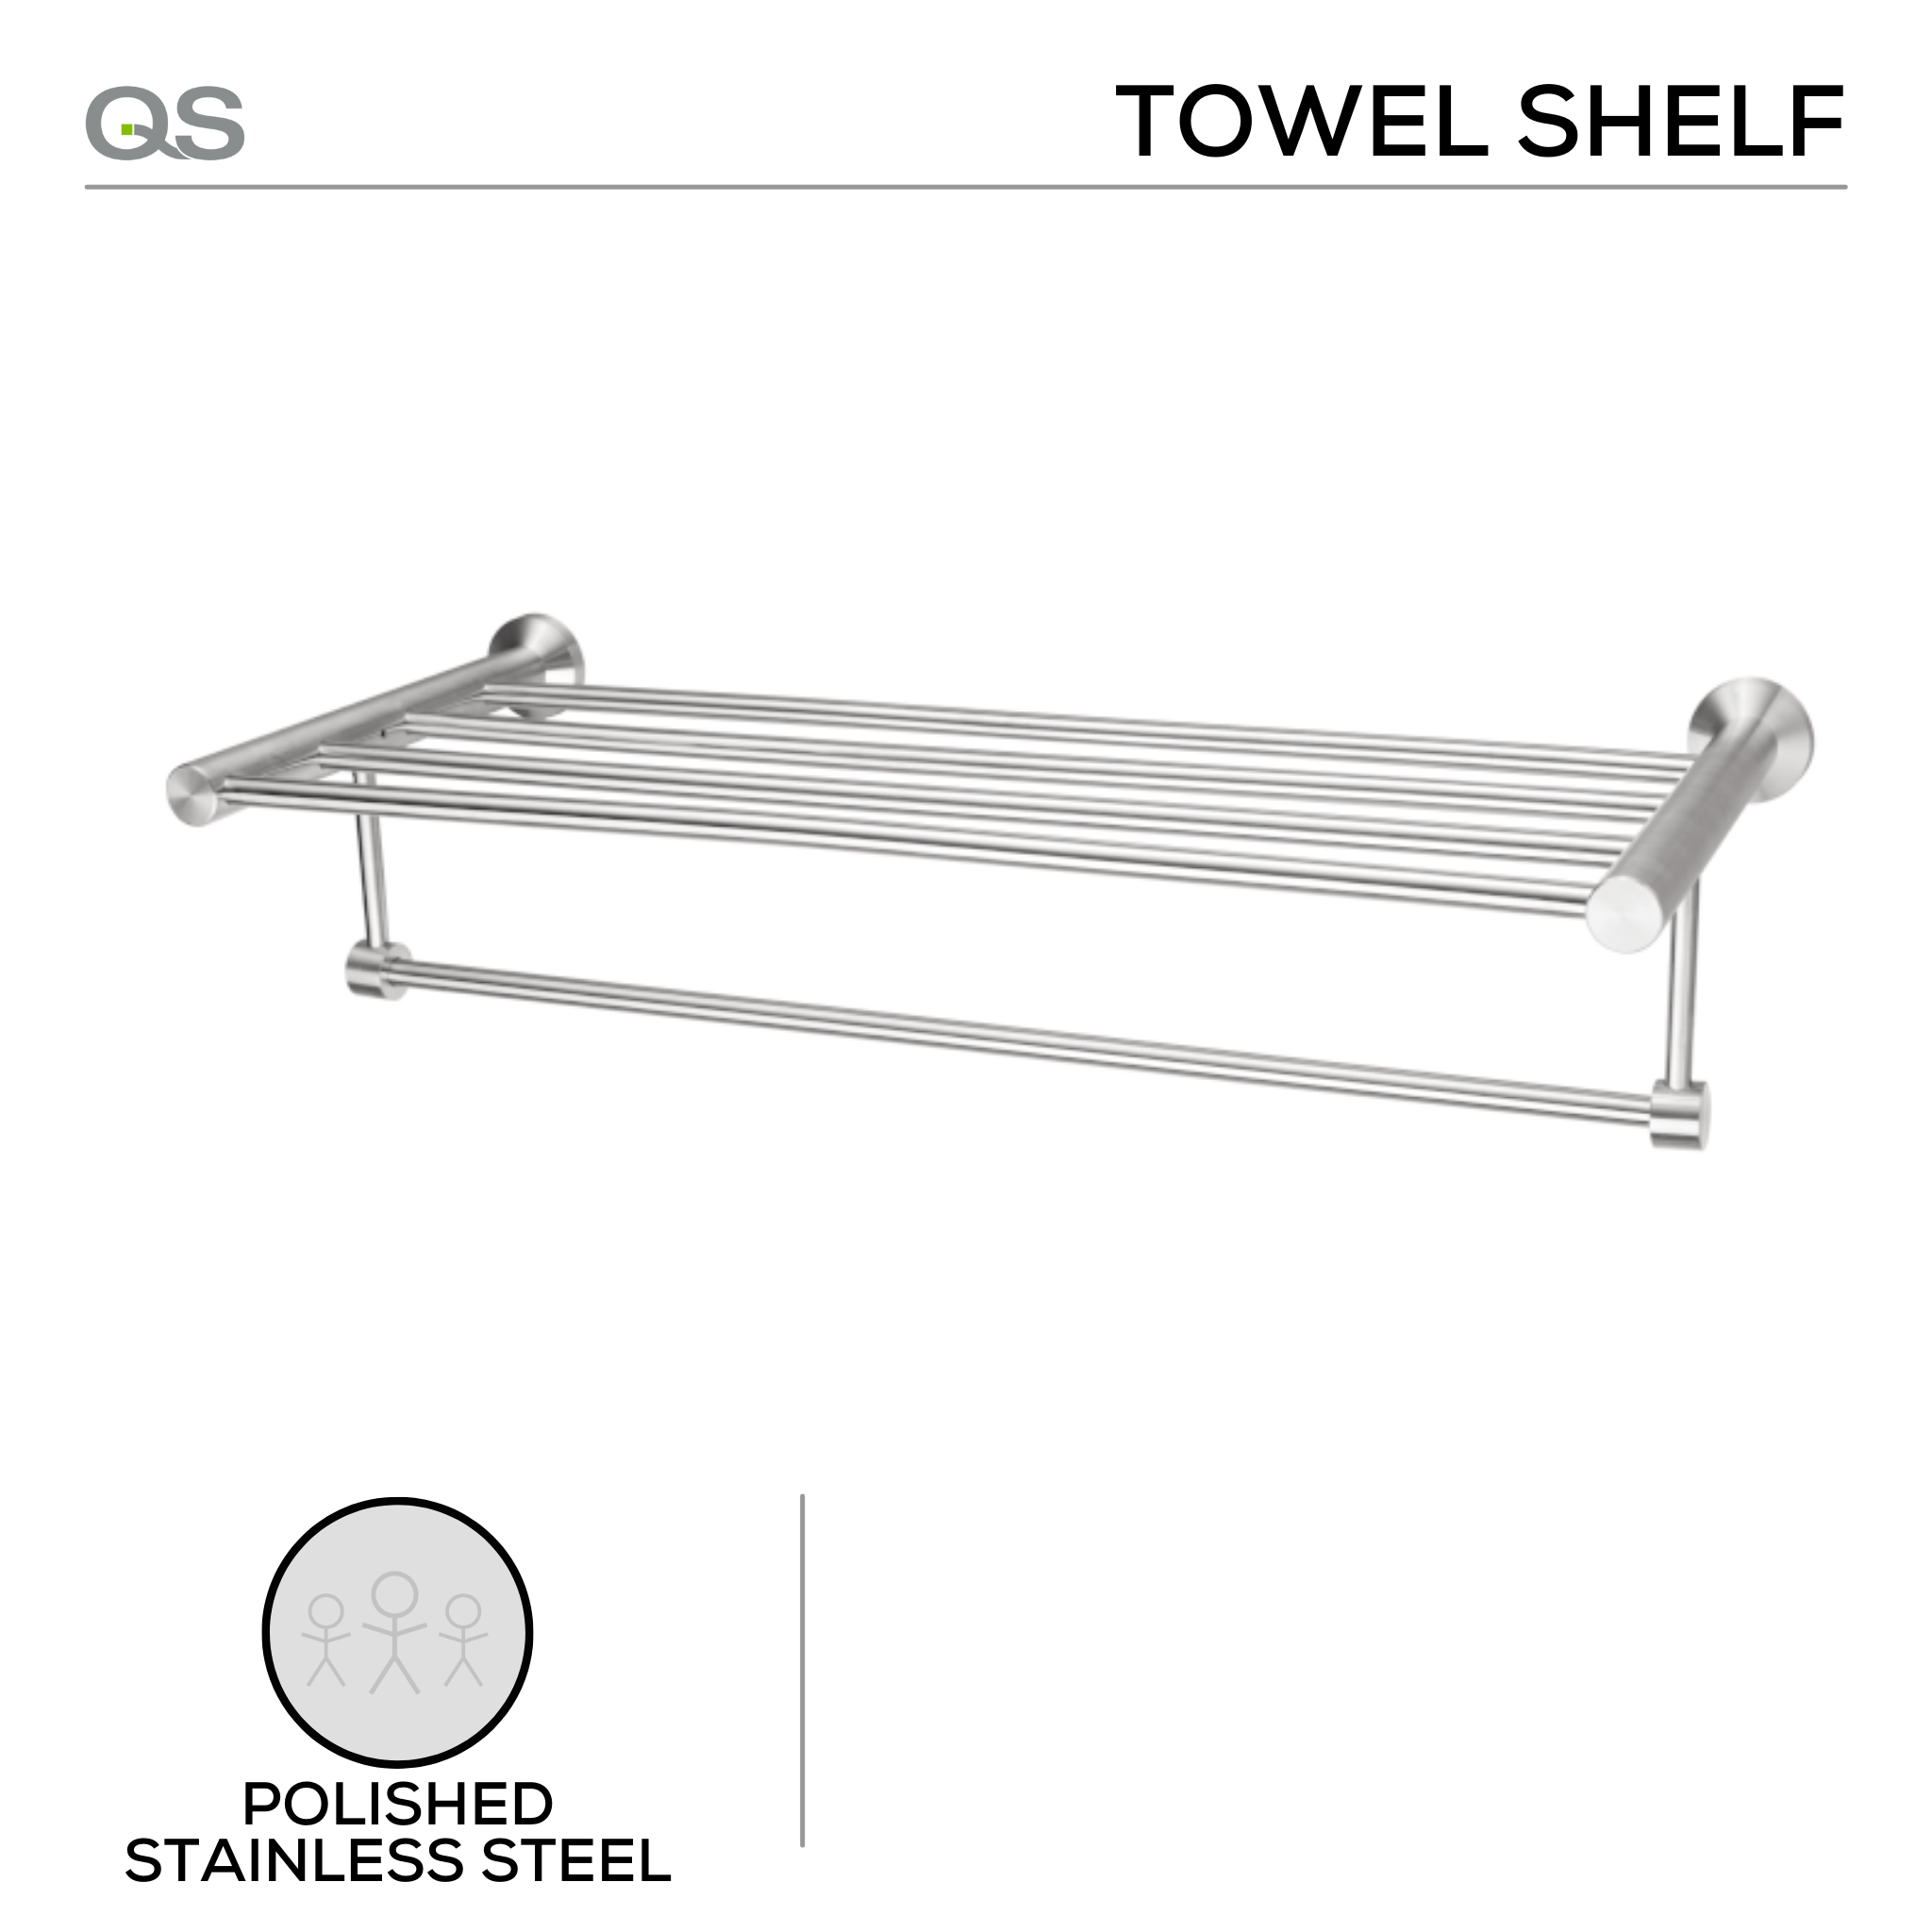 QS1504/PSS, Towel Shelf, Polished Stainless Steel, QS